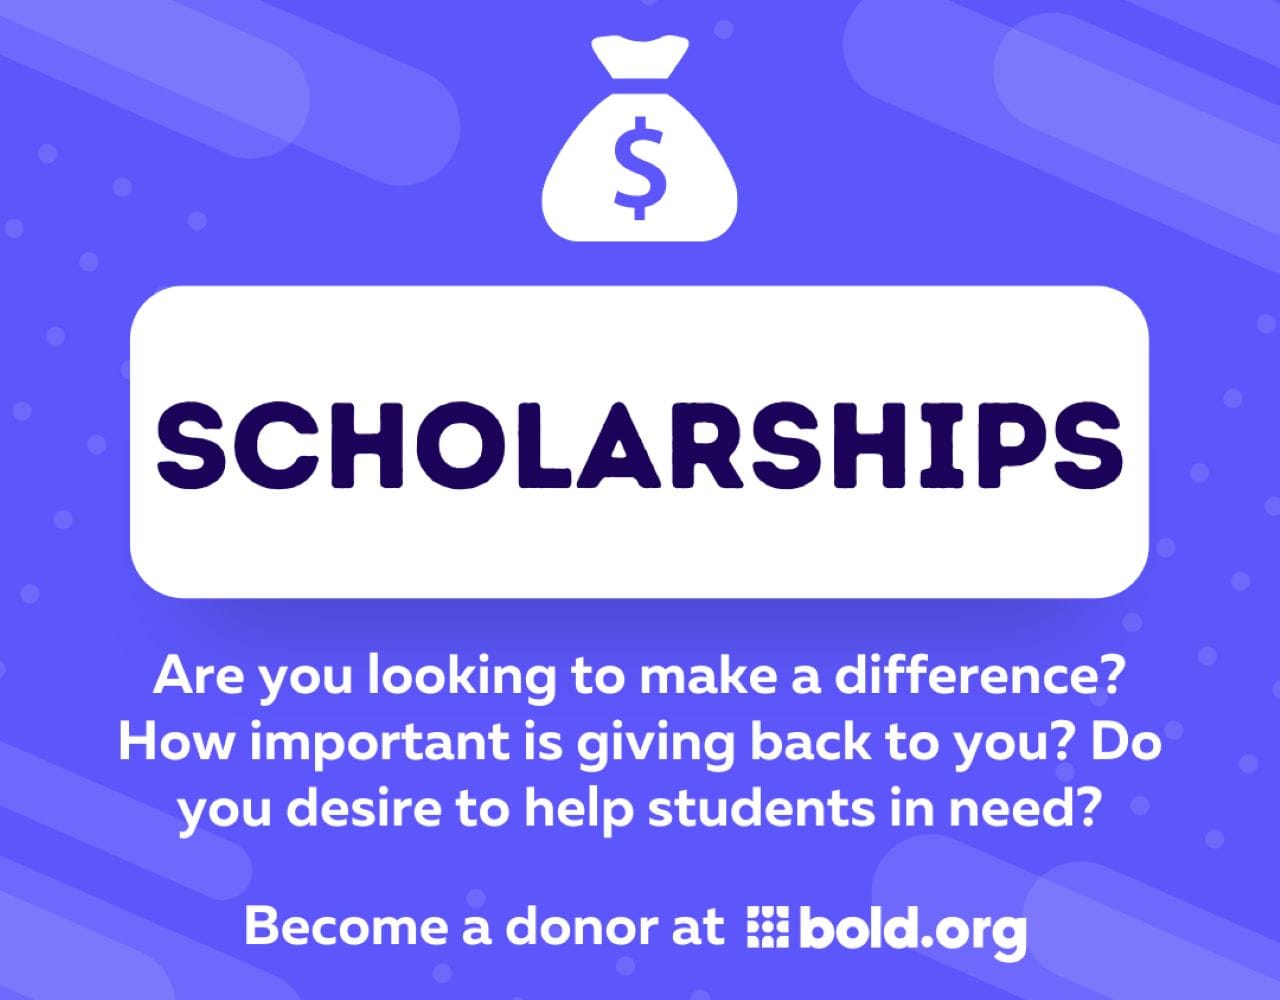 become a donor and use DAFs for scholarships